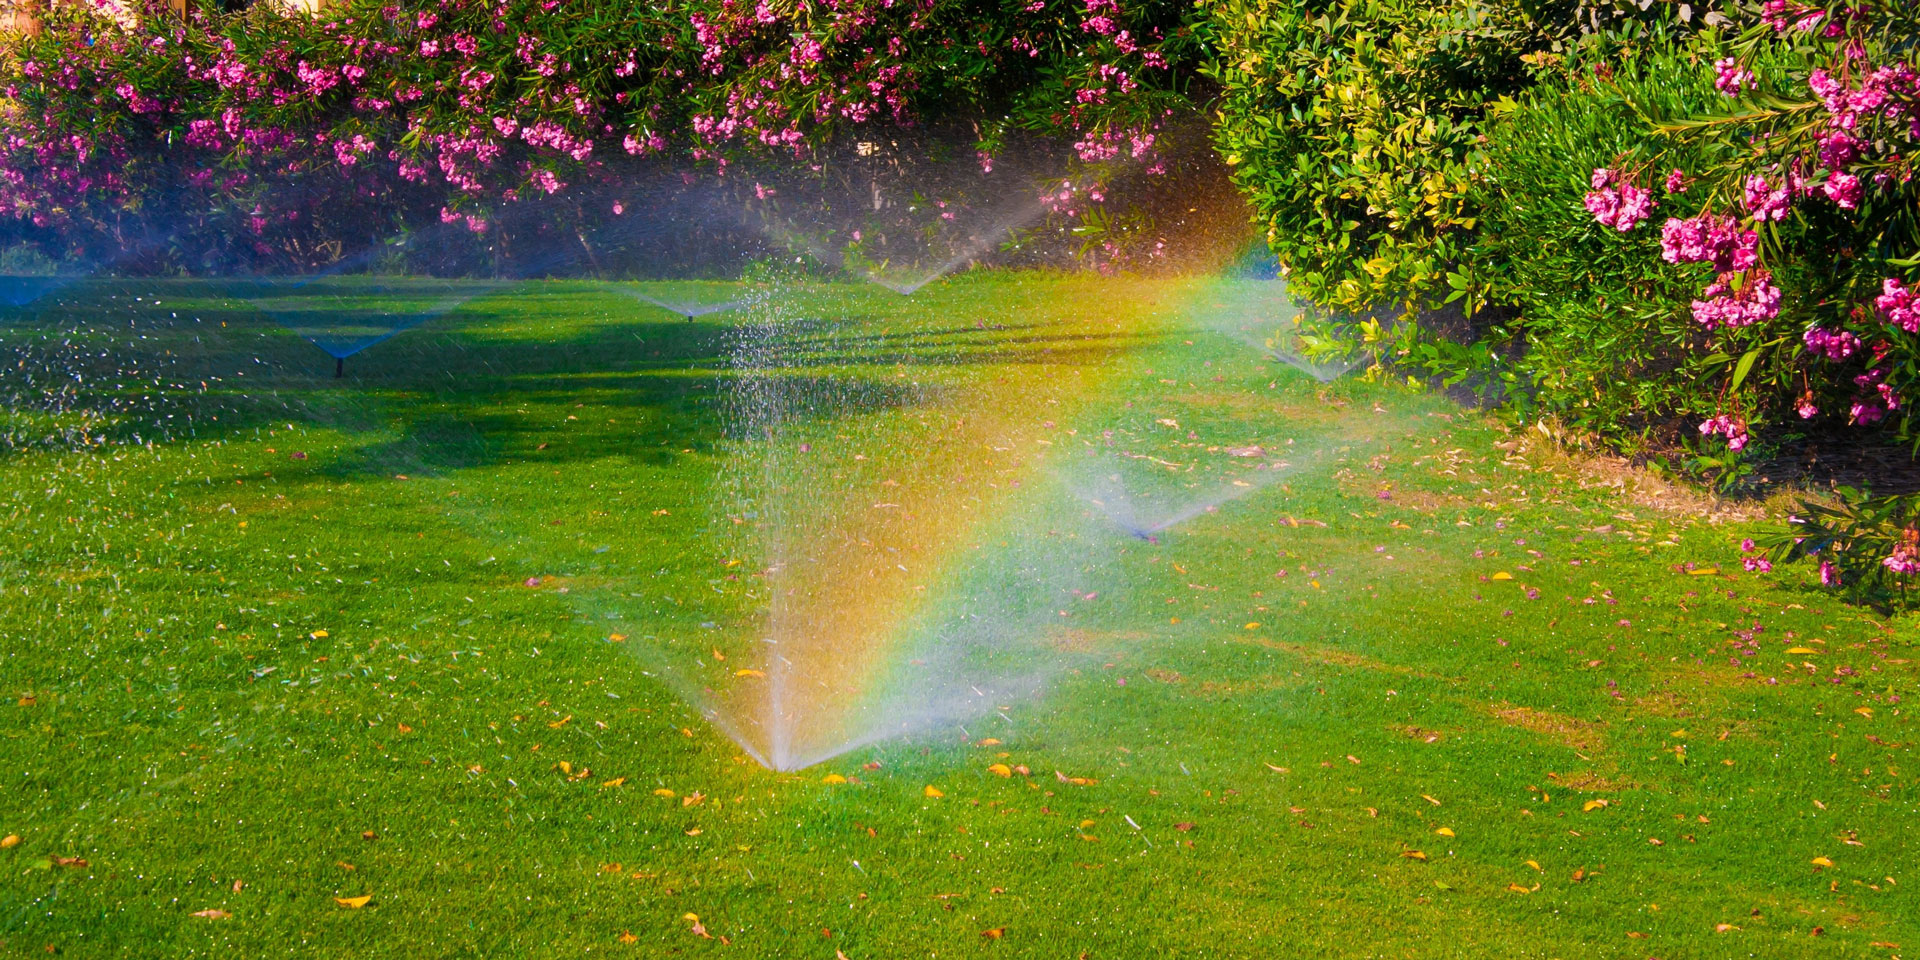 Sprinkler system with pretty flowers and a rainbow